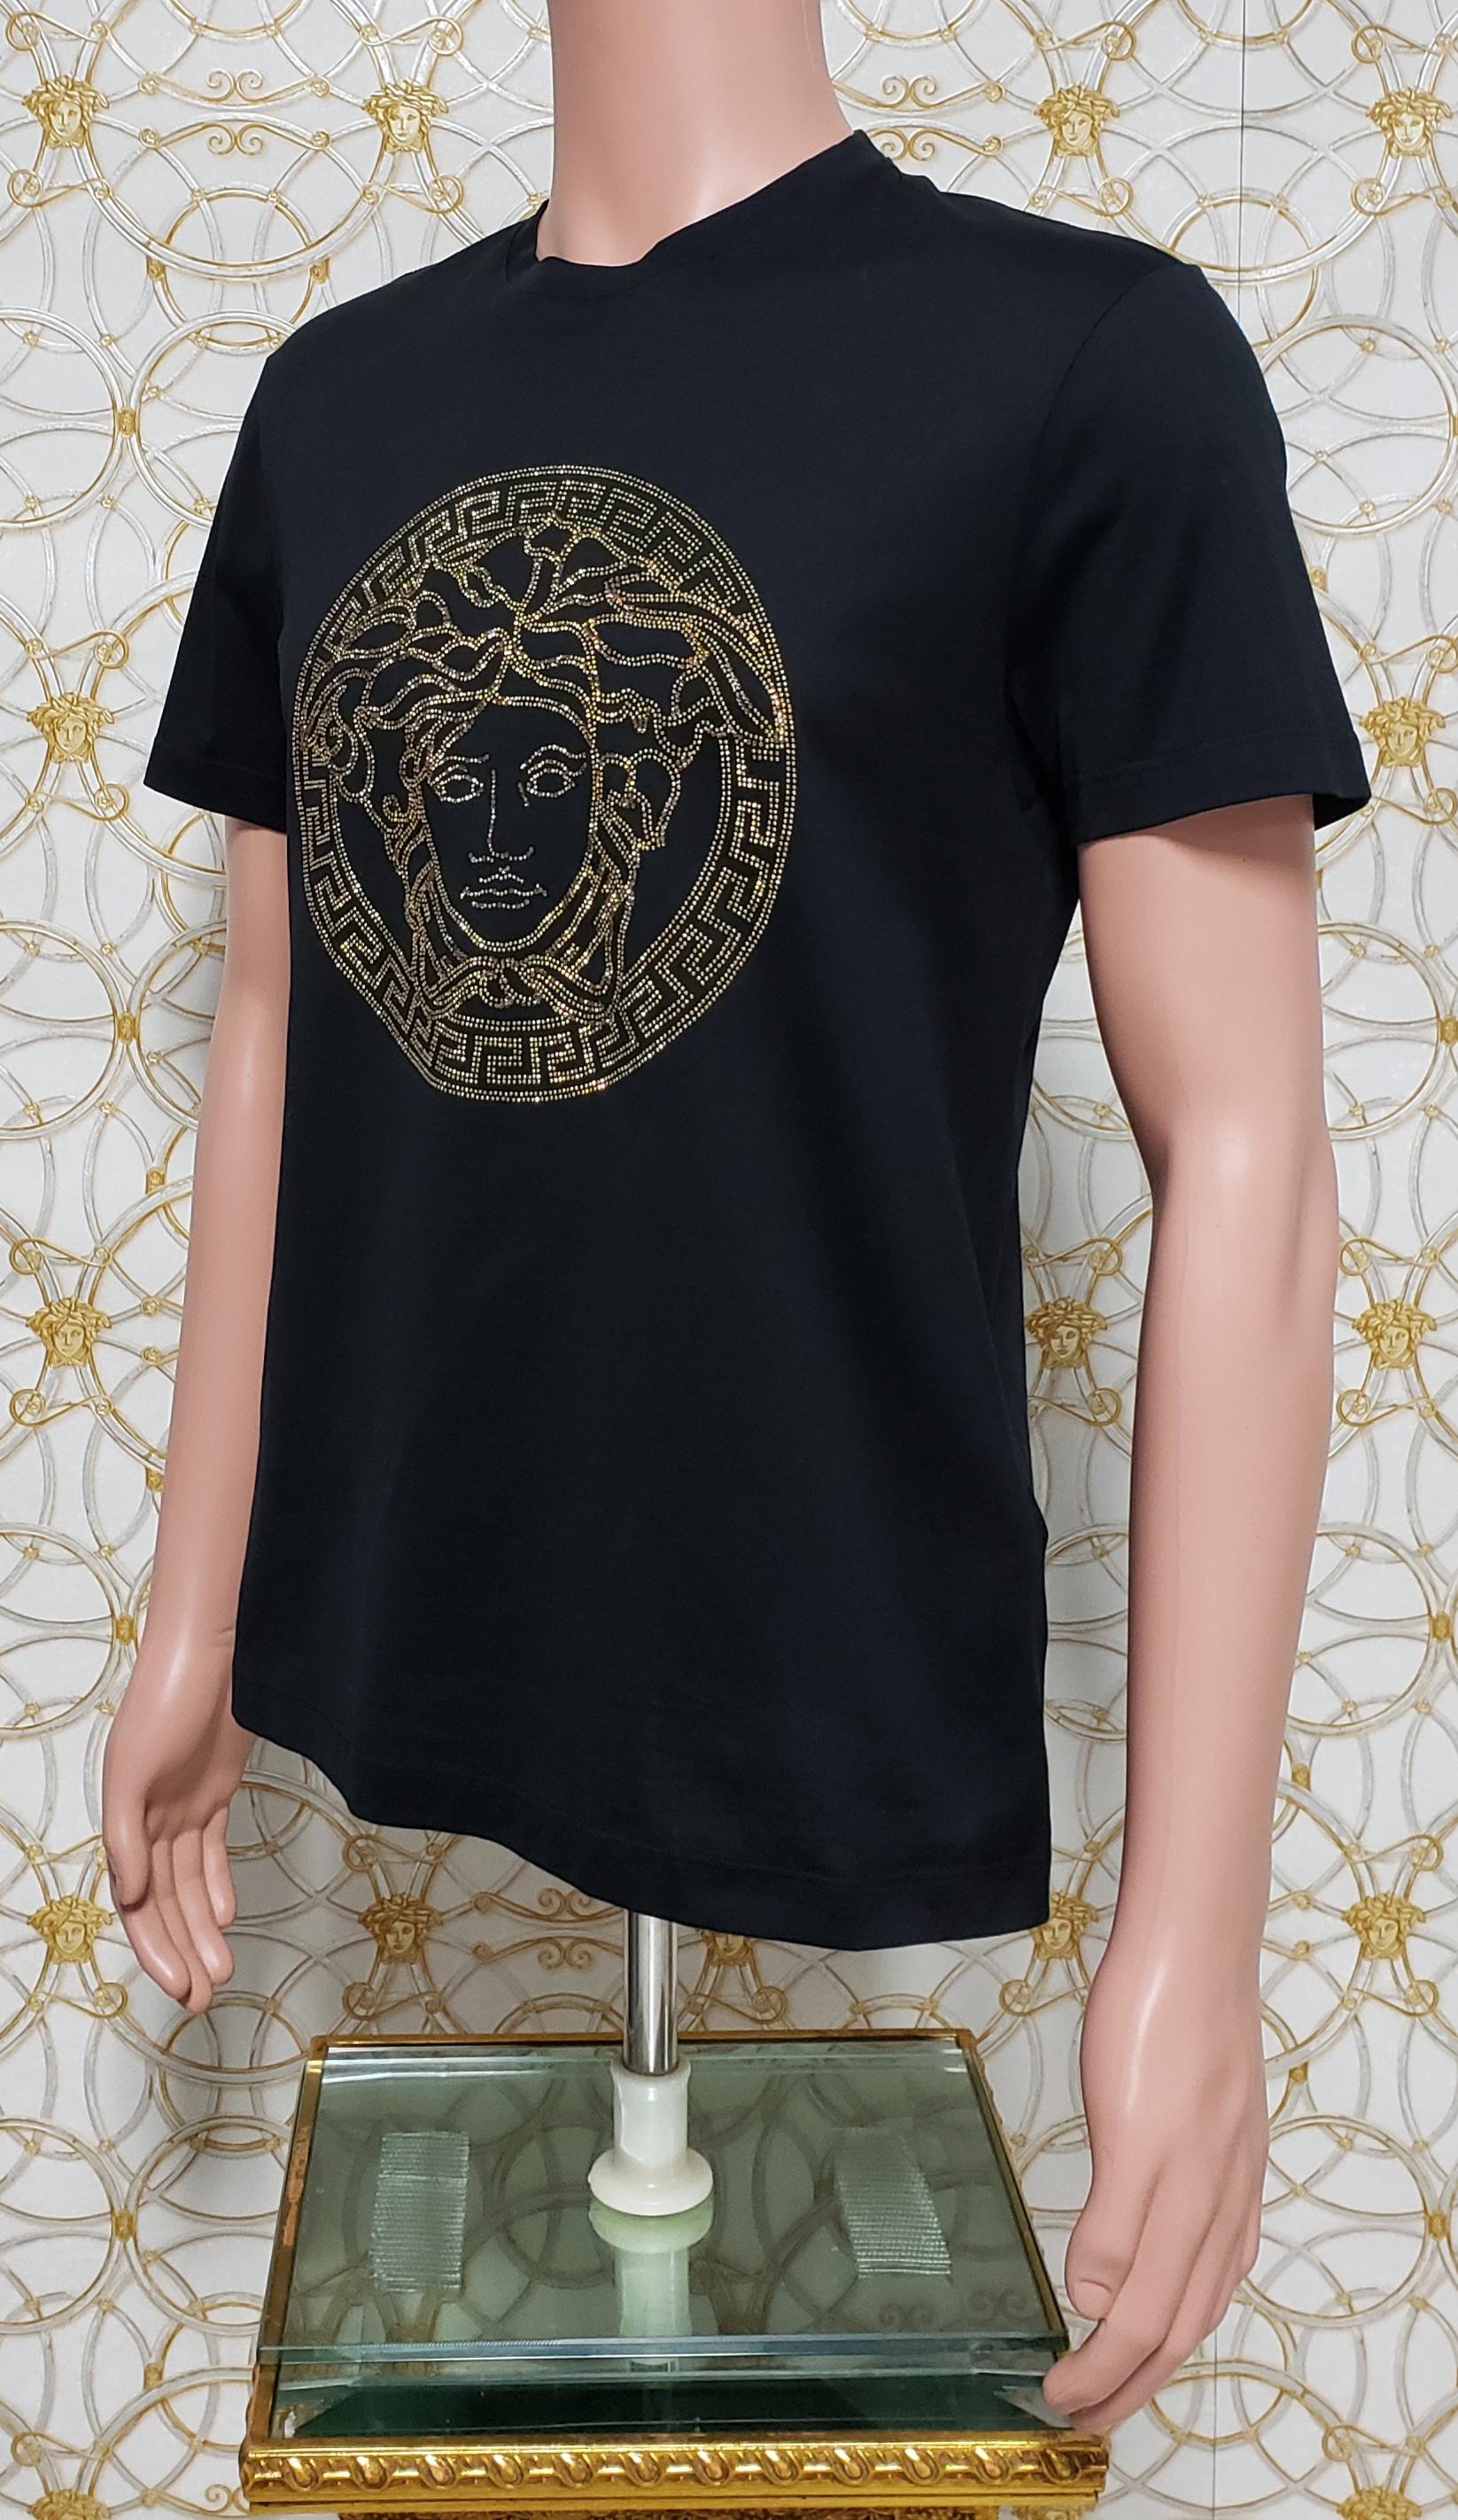 VERSACE 

BLACK T-SHIRT with FAMOUS GOLD MEDUSA

Color: black

Slim fit
Short sleeves 
Made in Italy

Content: 100% cotton 


size S

shoulder to shoulder 18 1/2